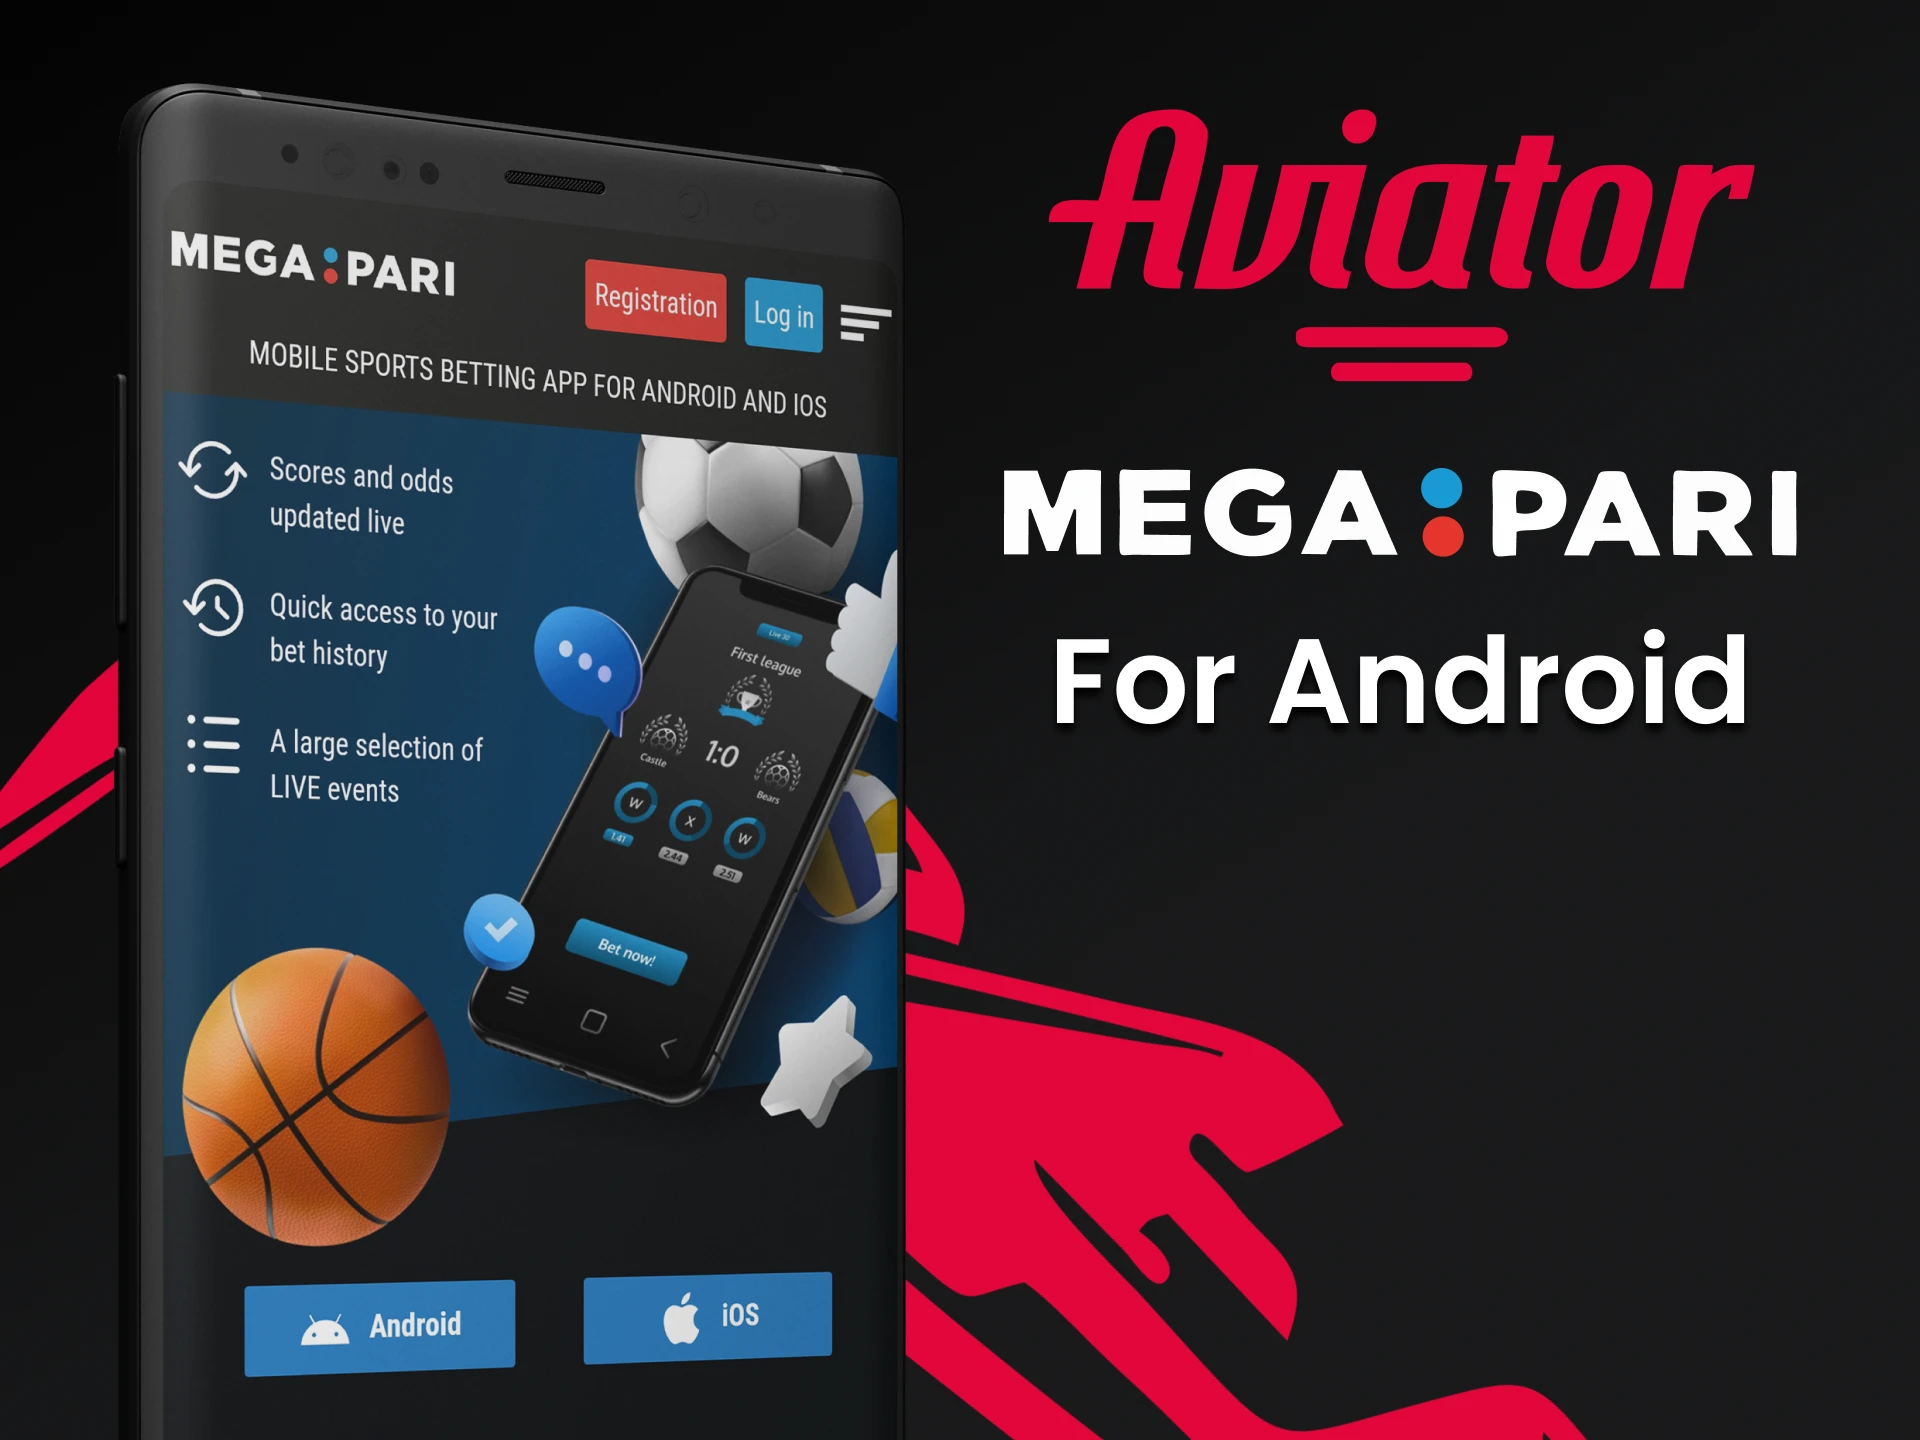 Download the Megapari app for Android to play Aviator.